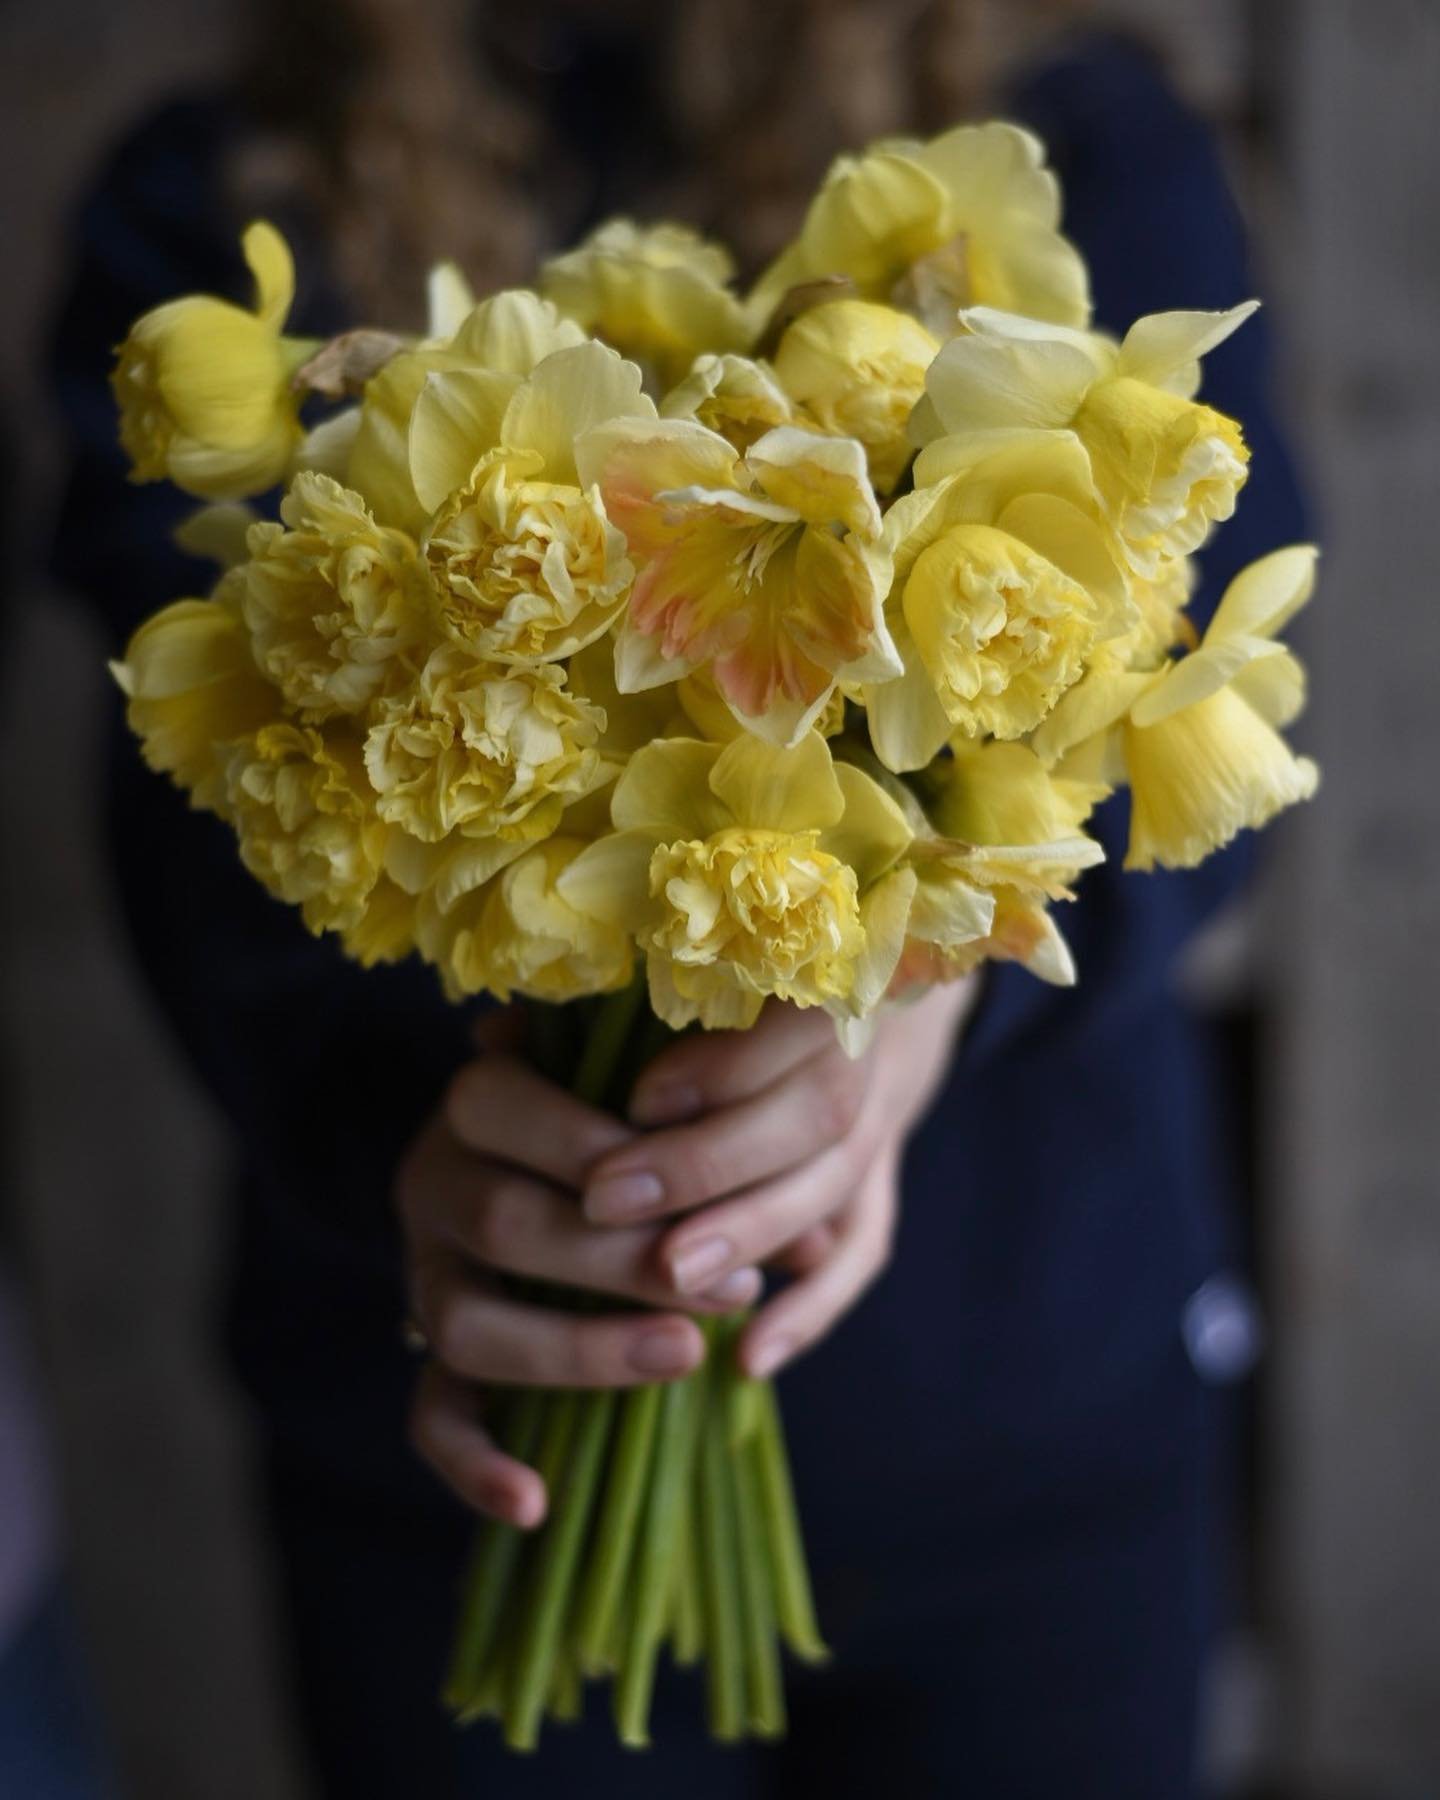 Today, our team had a bountiful spring harvest for the Saturday farmers market! 

We&rsquo;ve gathered a beautiful array of fancy narcissus and tulips, alongside an abundance of fresh produce: rhubarb, spinach, arugula, bok choy, baby kale, radishes,